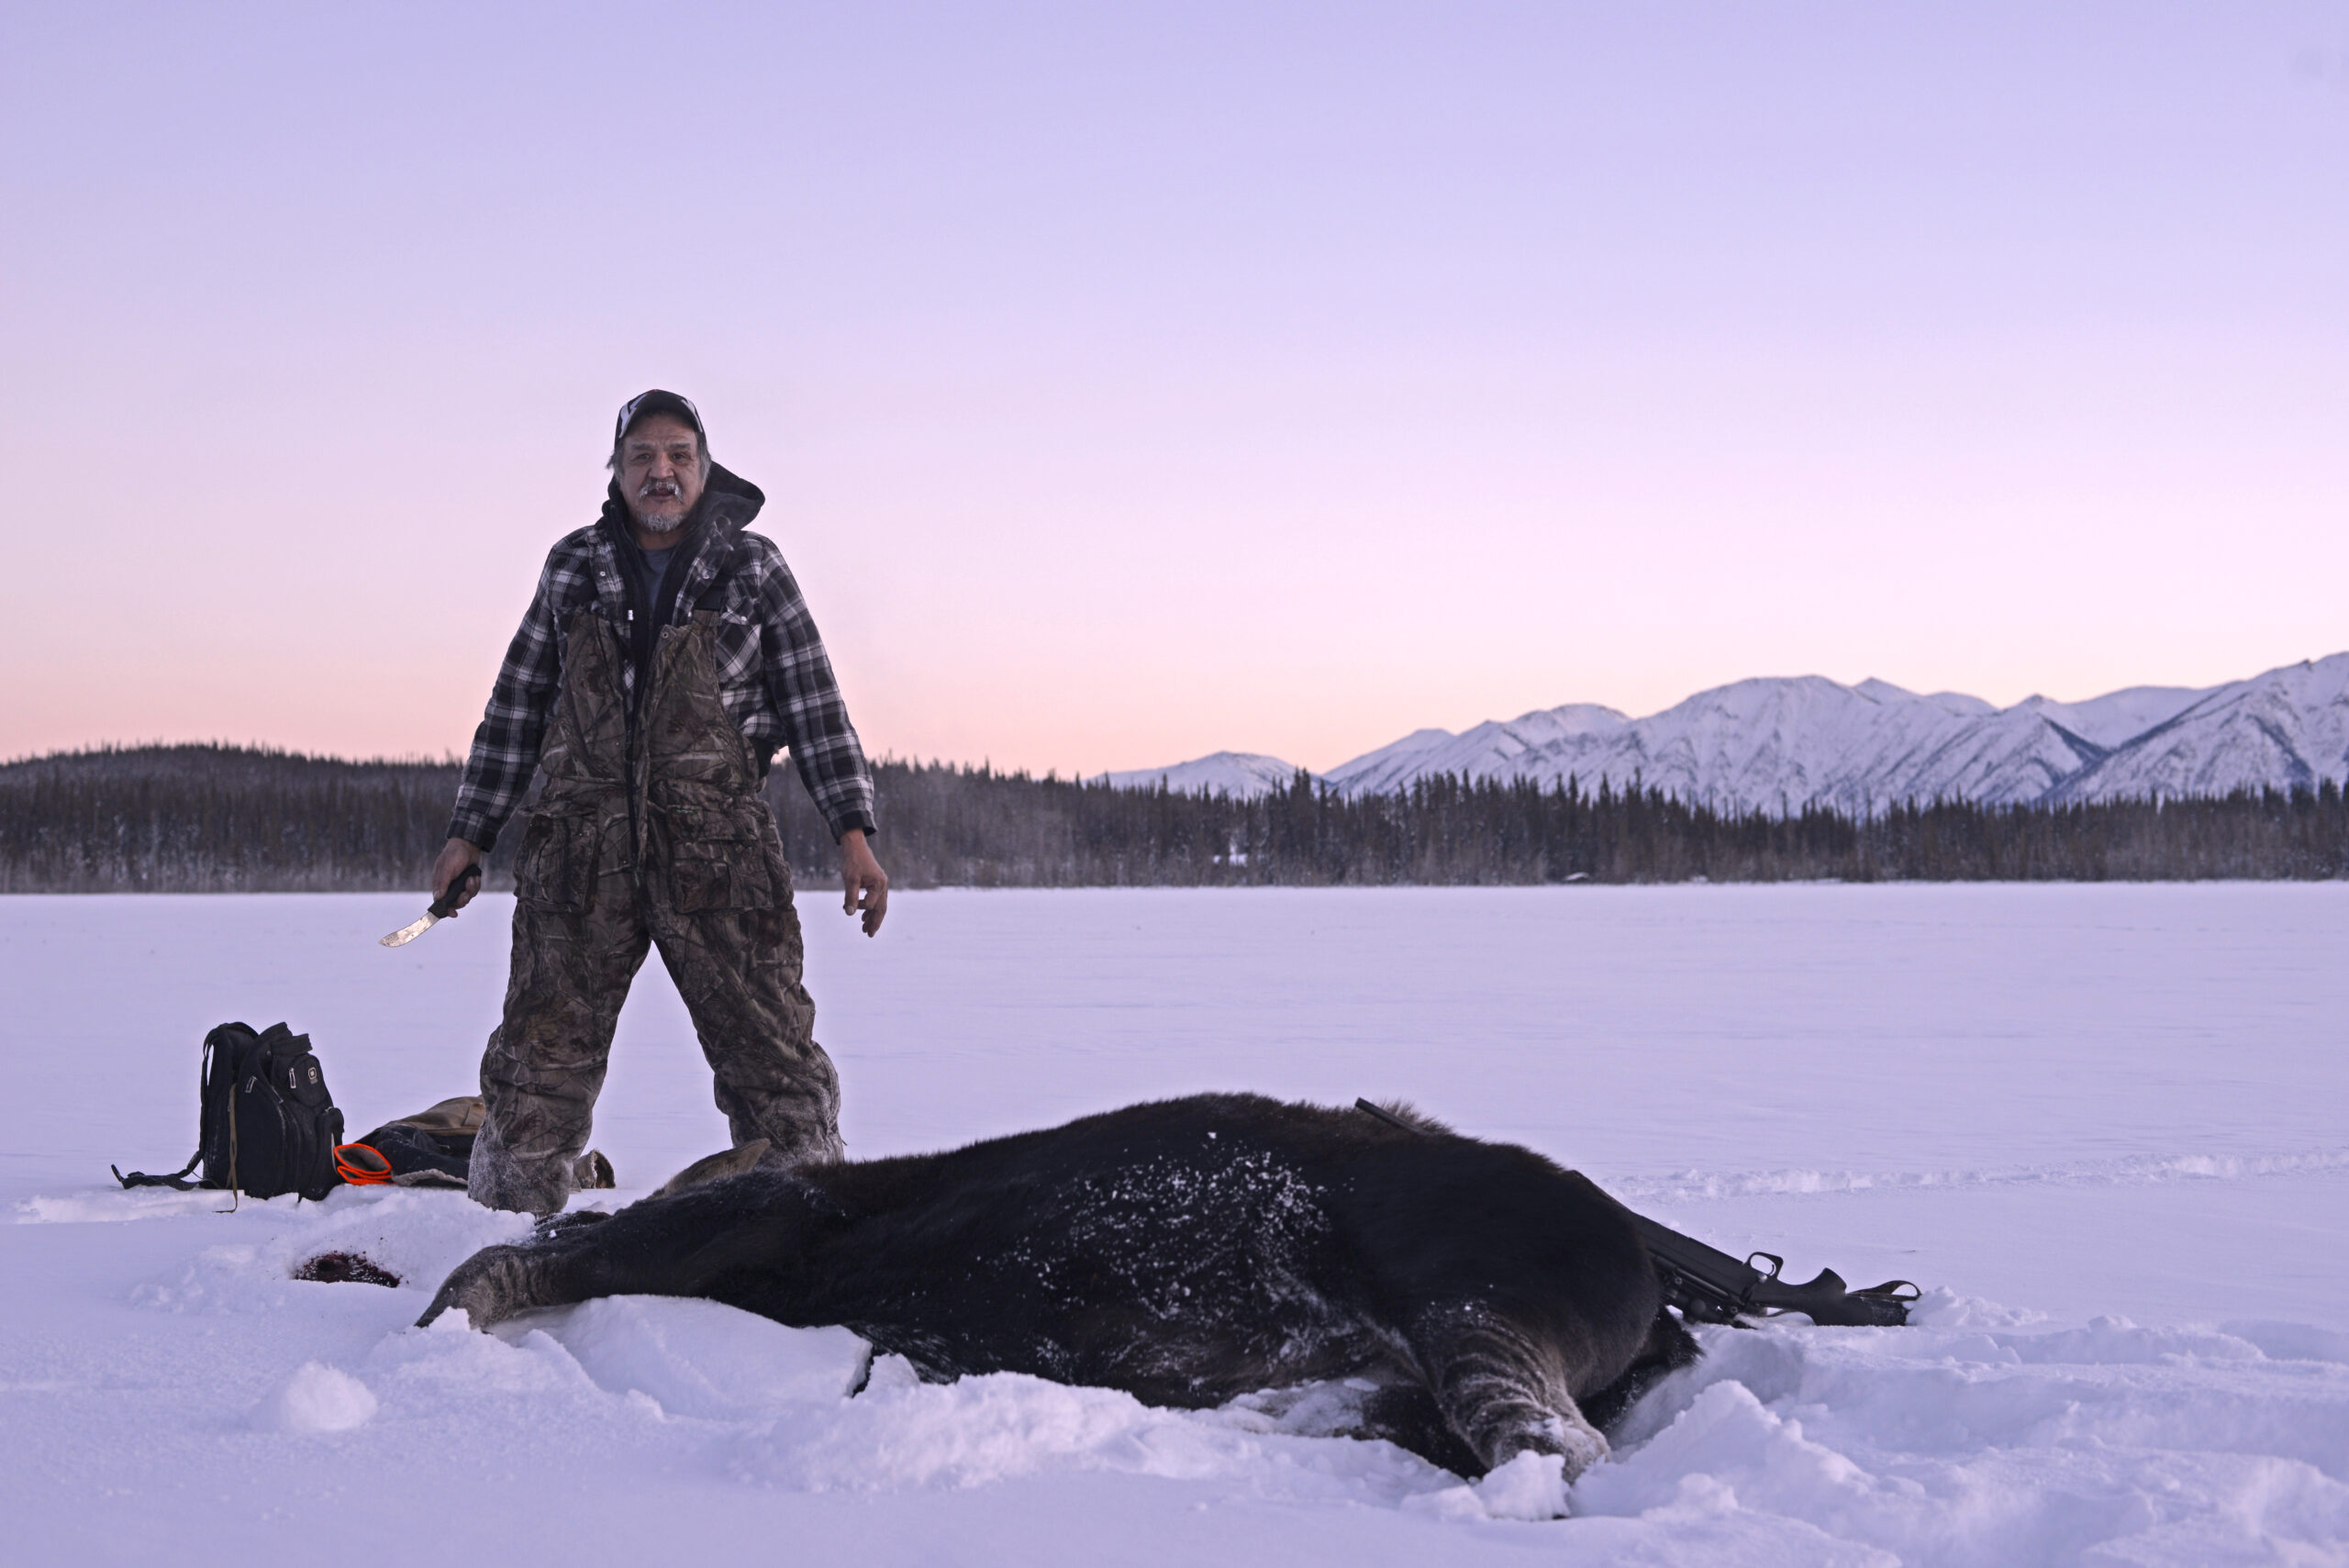 man standing in the snow next to downed animal